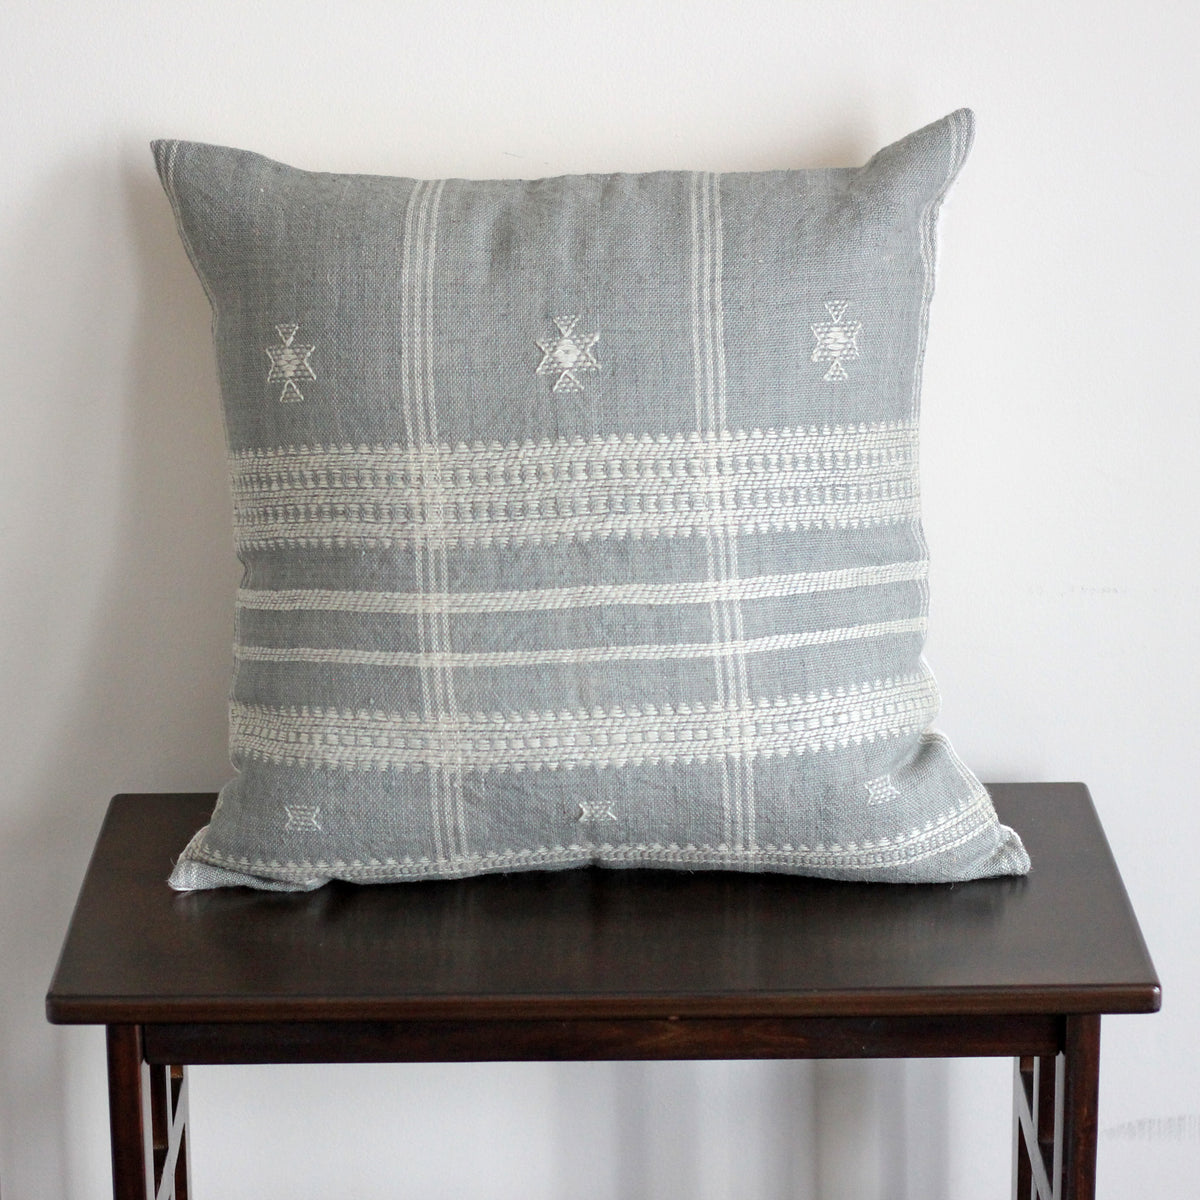 cushion cover with antique look